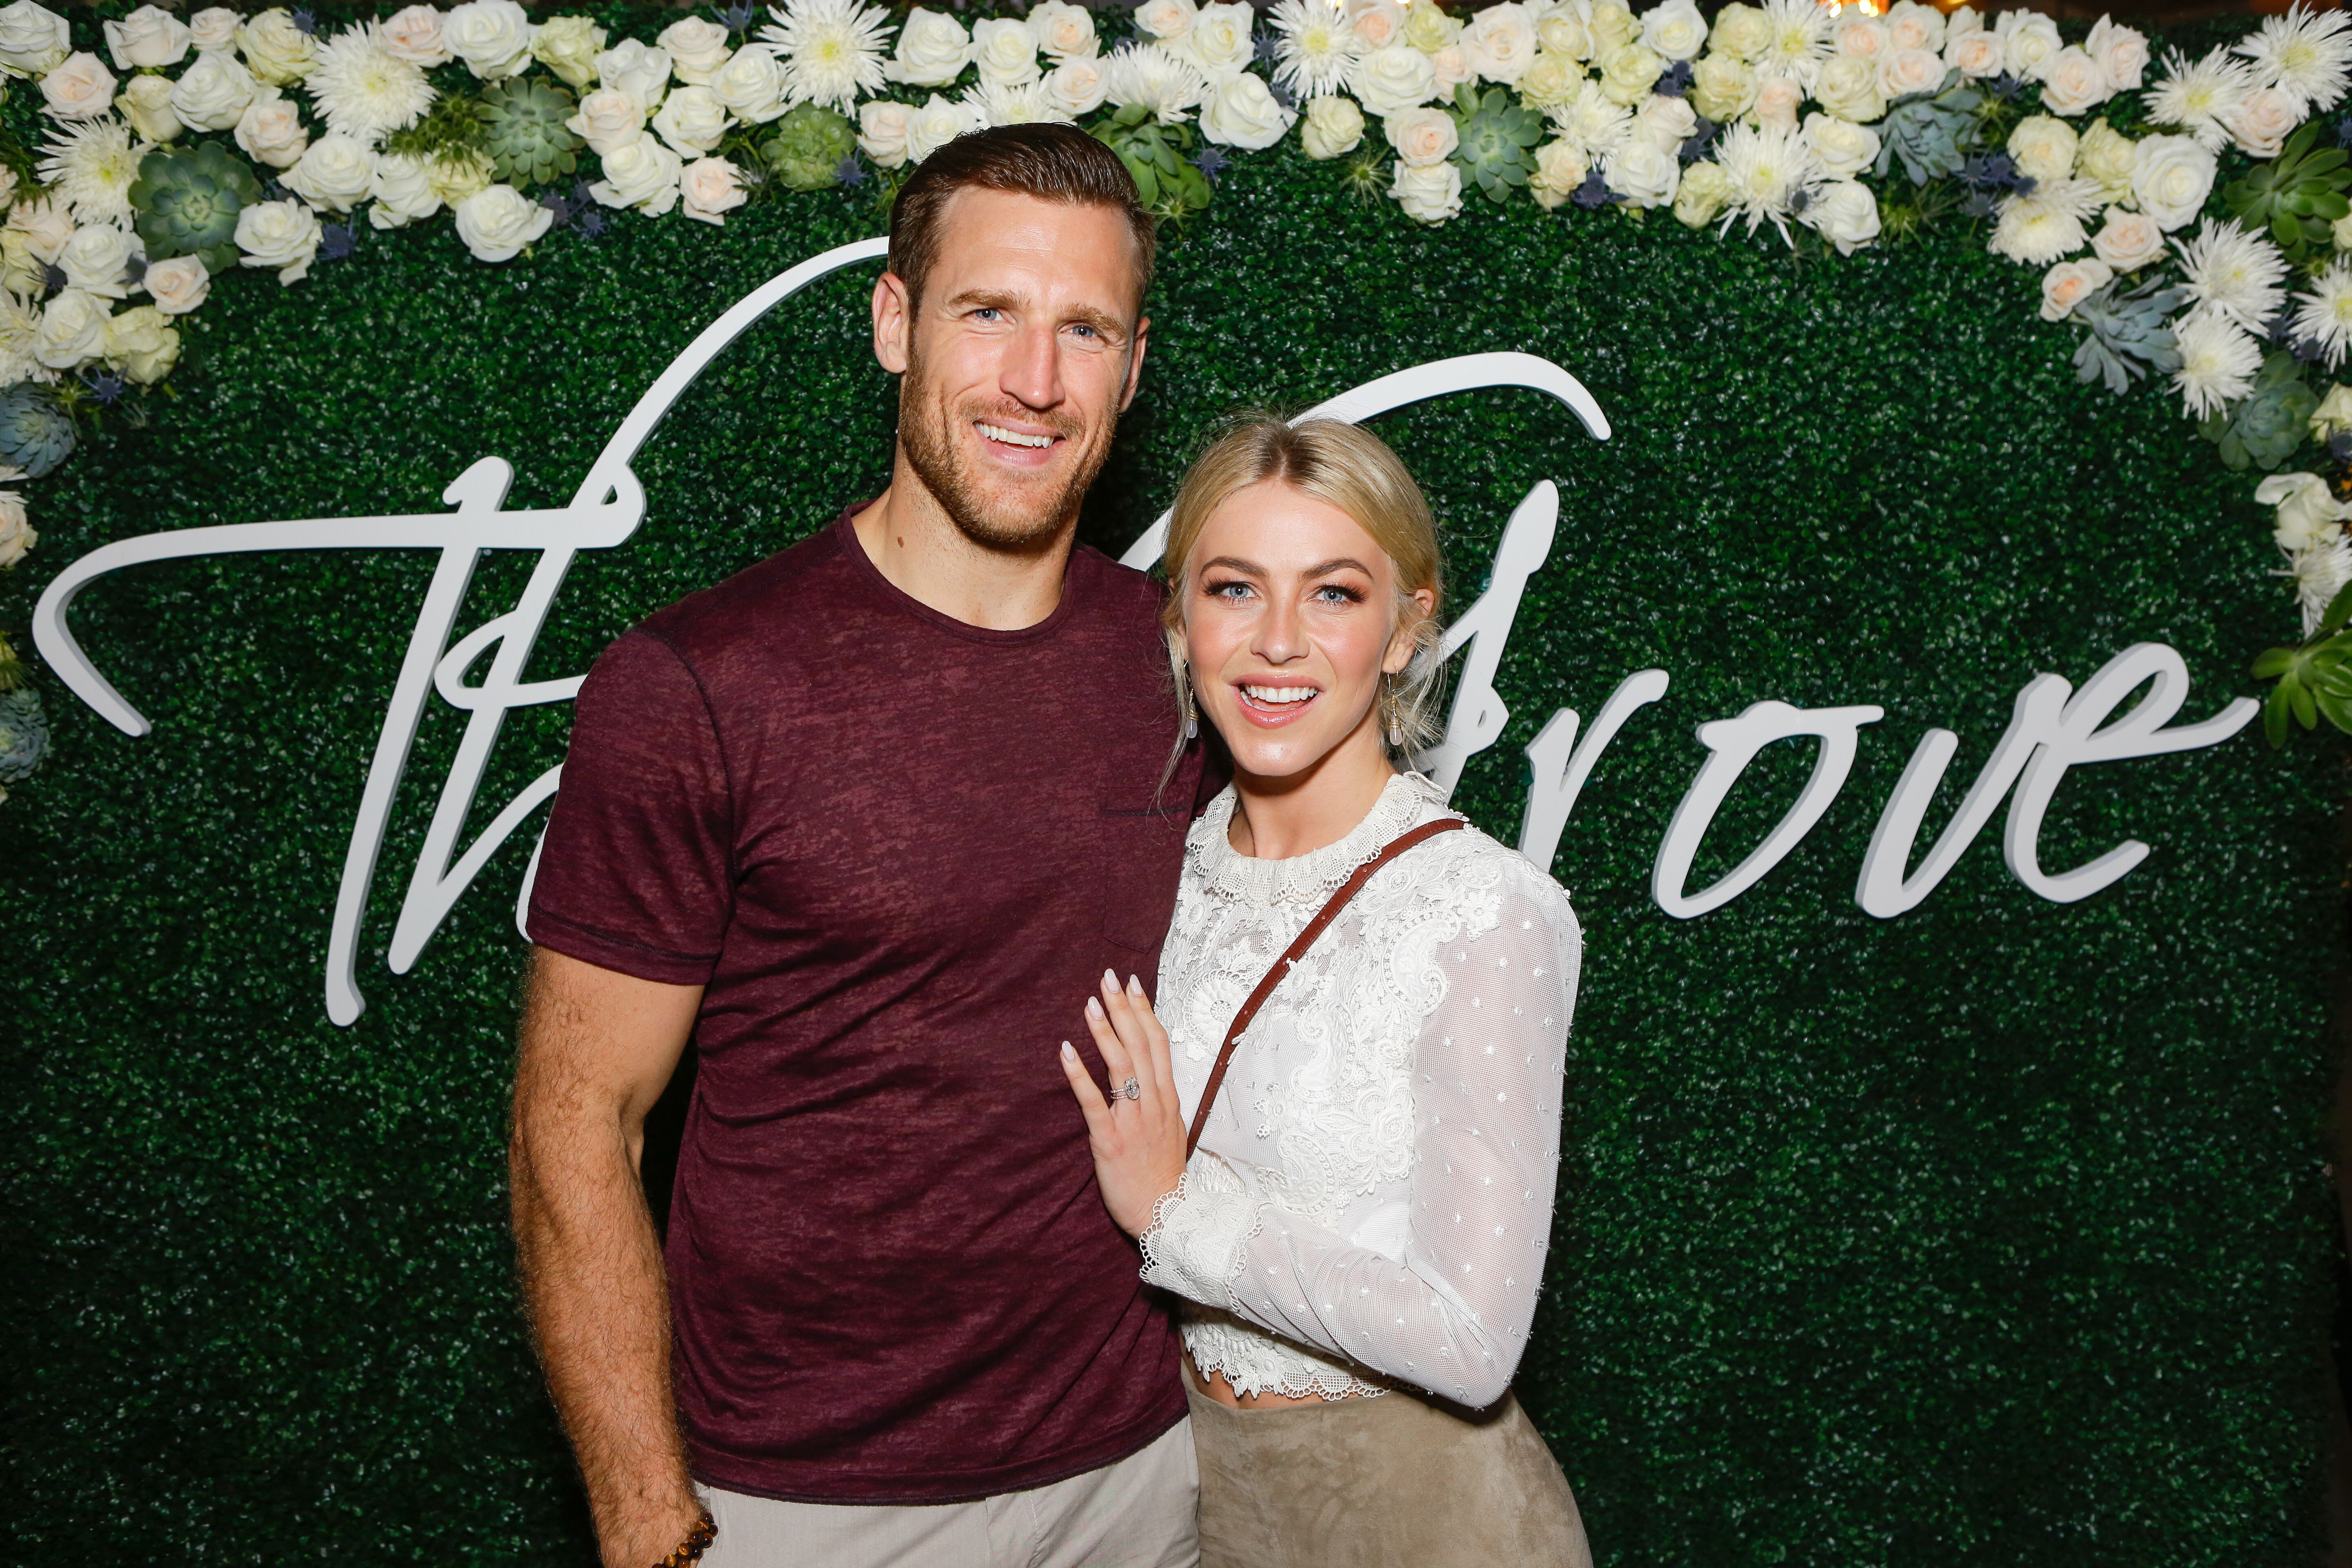 Brooks Laich and Julianne Hough at the Paint & Sip & Help event on October 12, 2017, in Los Angeles, California | Photo: Tiffany Rose/Getty Images